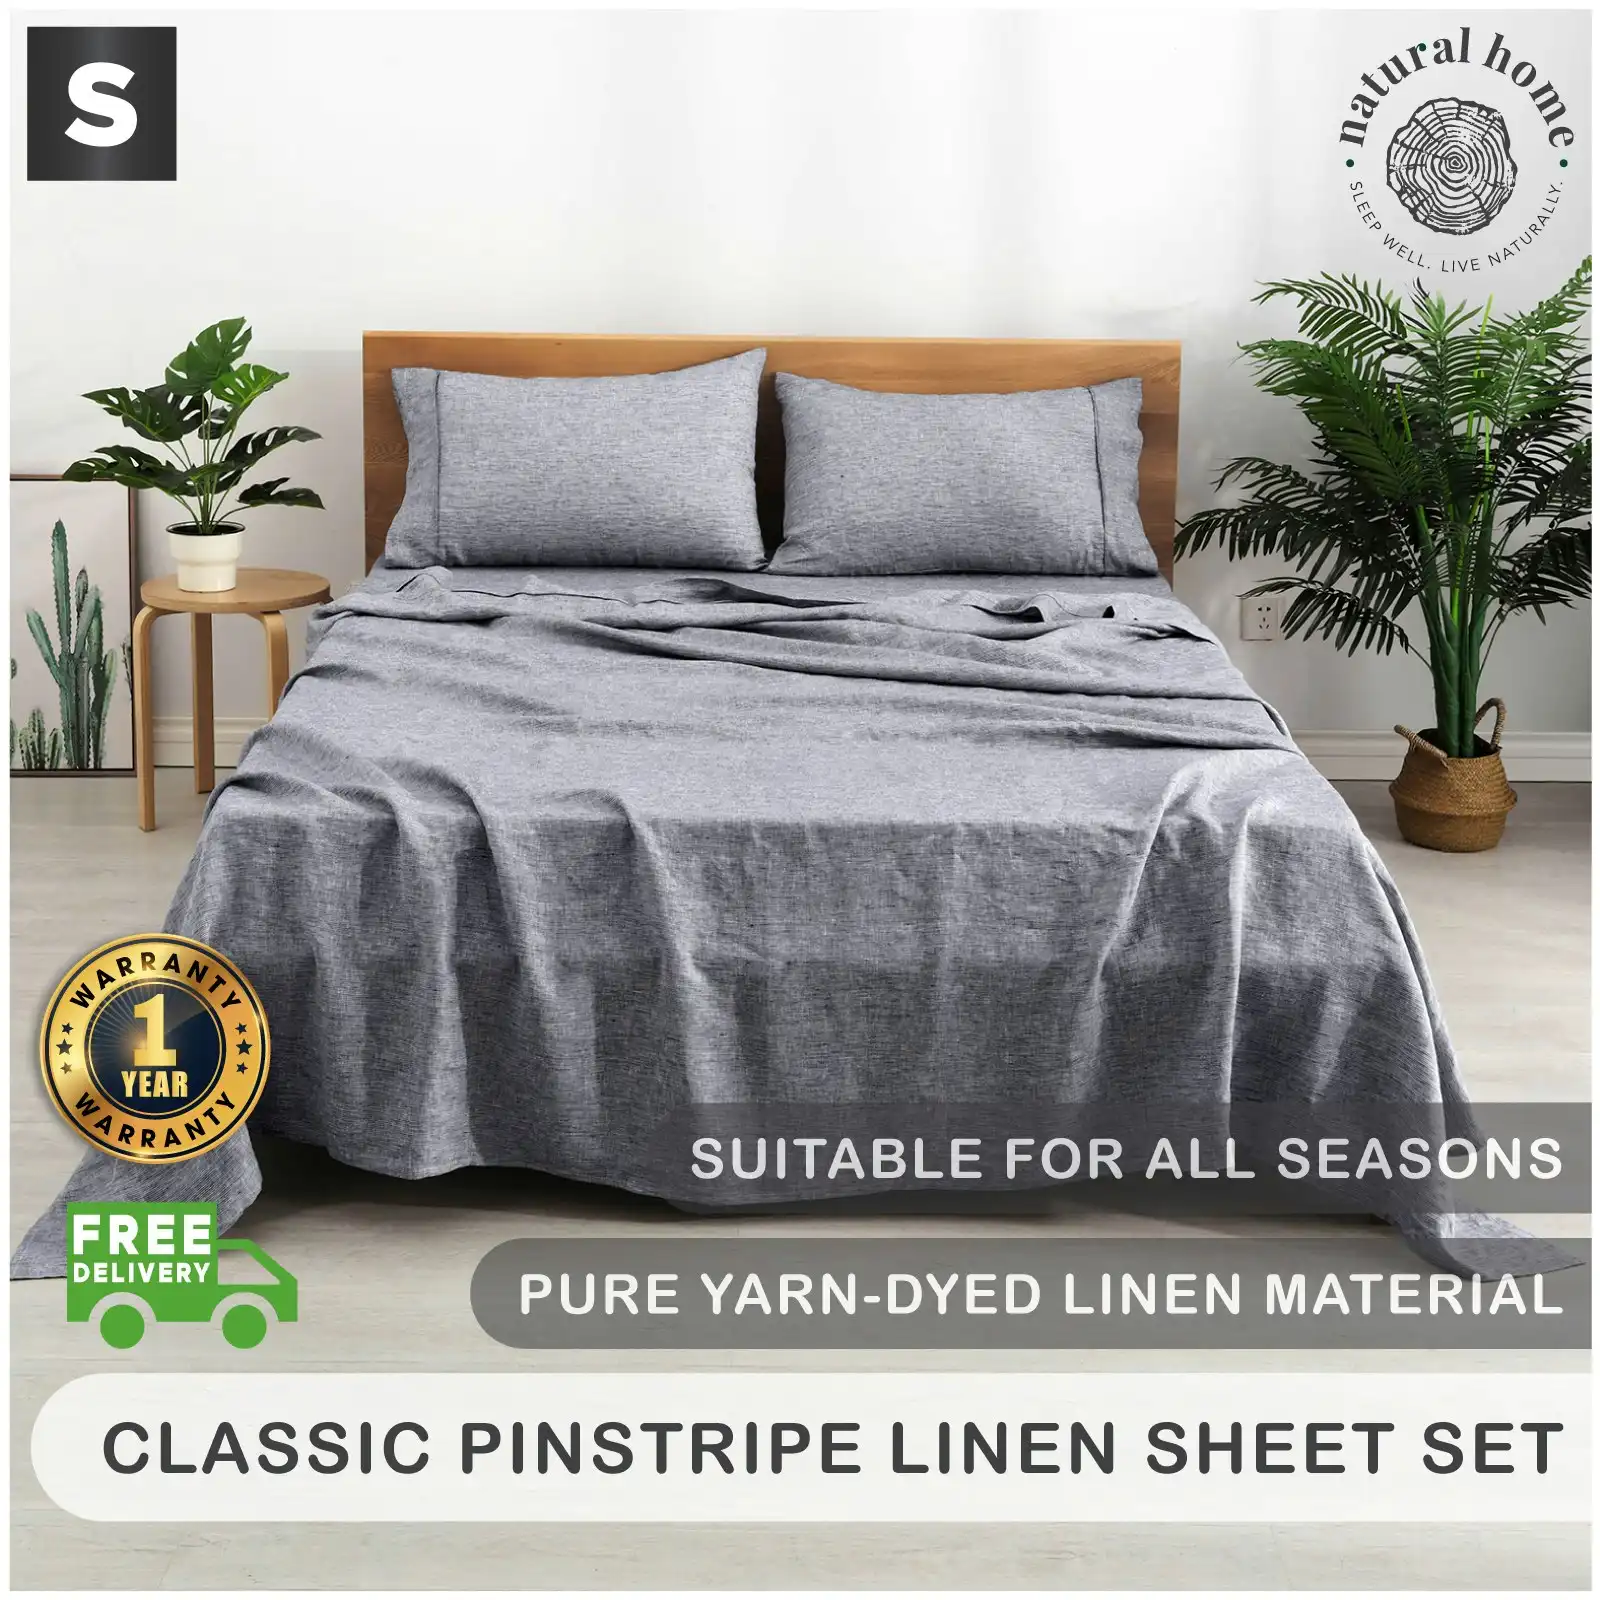 Natural Home Classic Pinstripe Linen Sheet Set Dark with White Pinstripe Single Bed